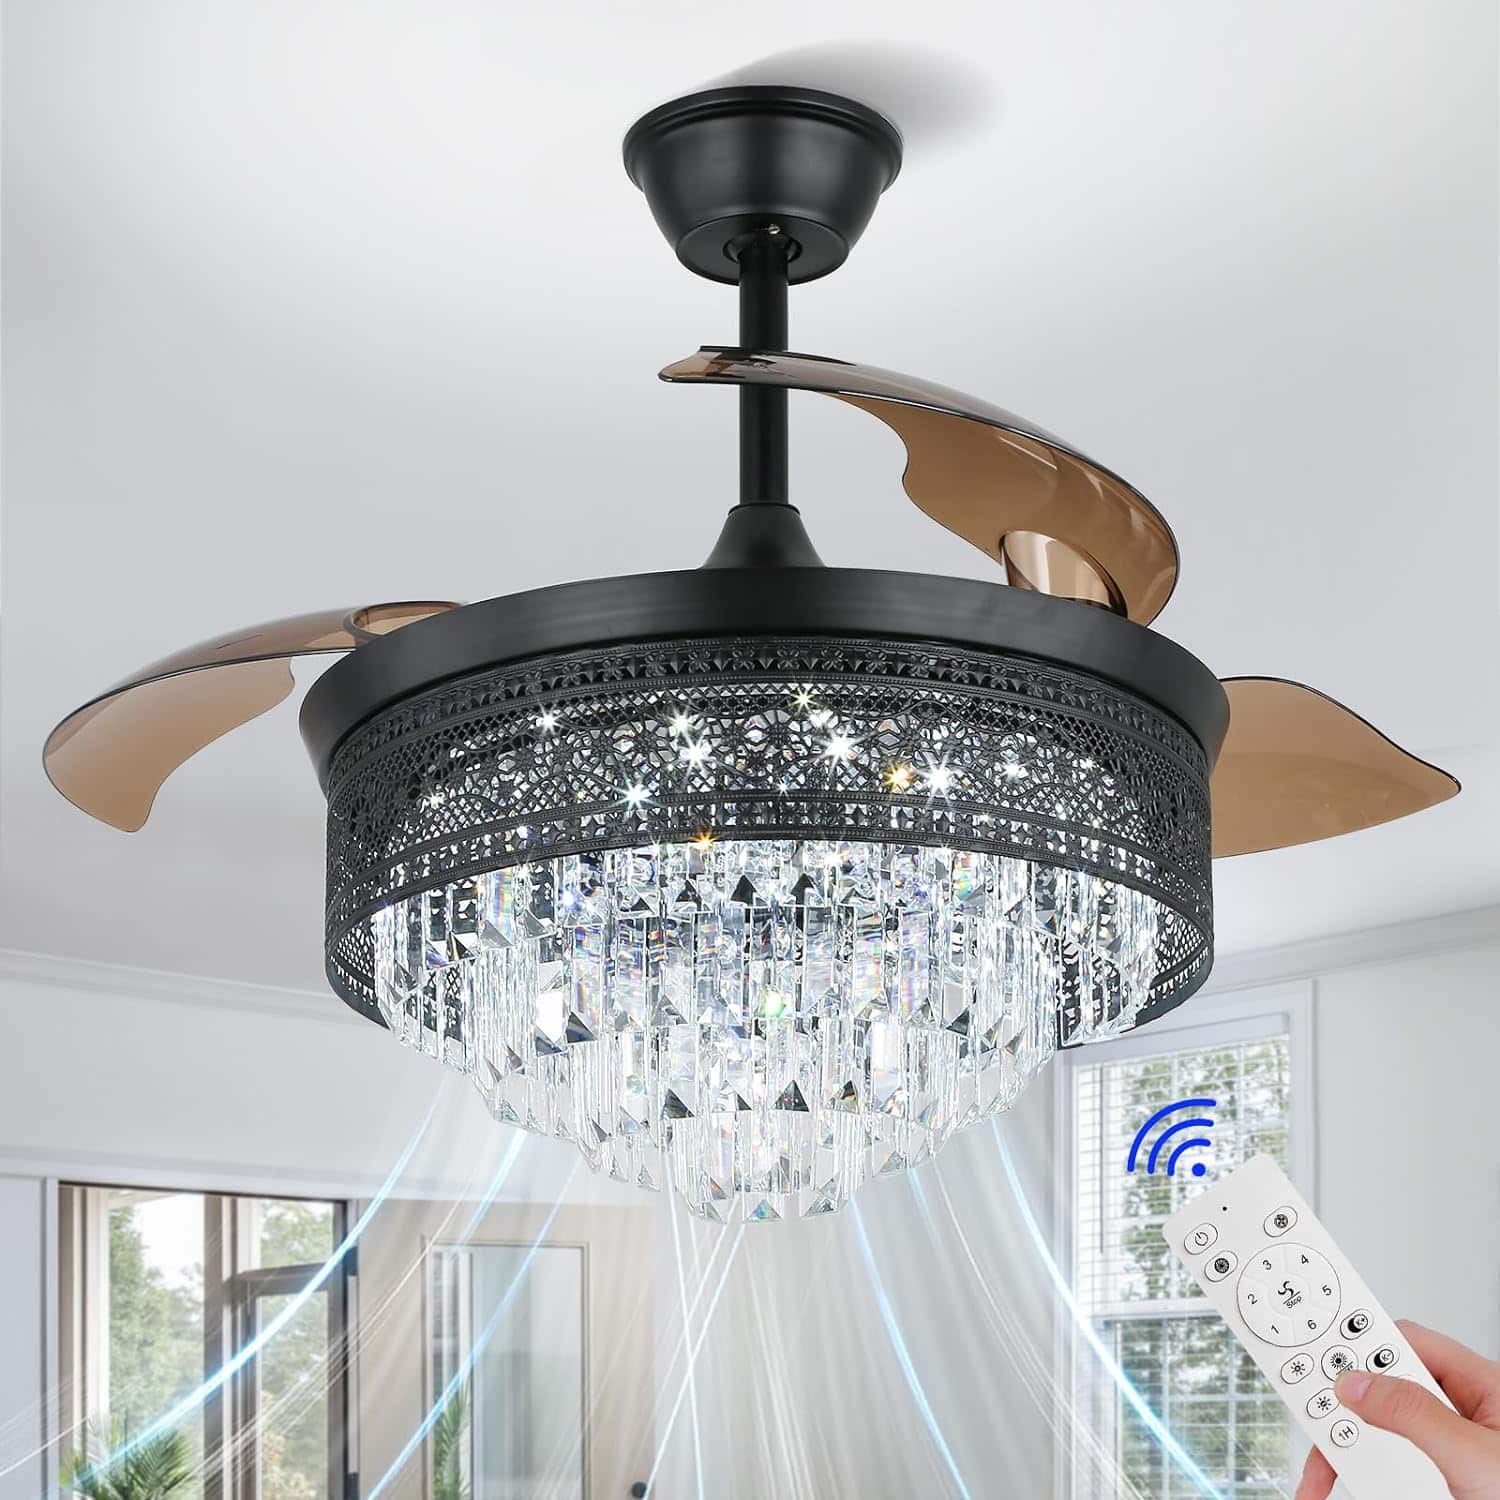 Ceiling Fans with Lights 42 Dimmable Retractable Fandelier Chandelier Fan Modern Crystal Ceiling Fans with Lights and Remote for Bedroom Living Room Invisible Blades 6 Speeds, Gold